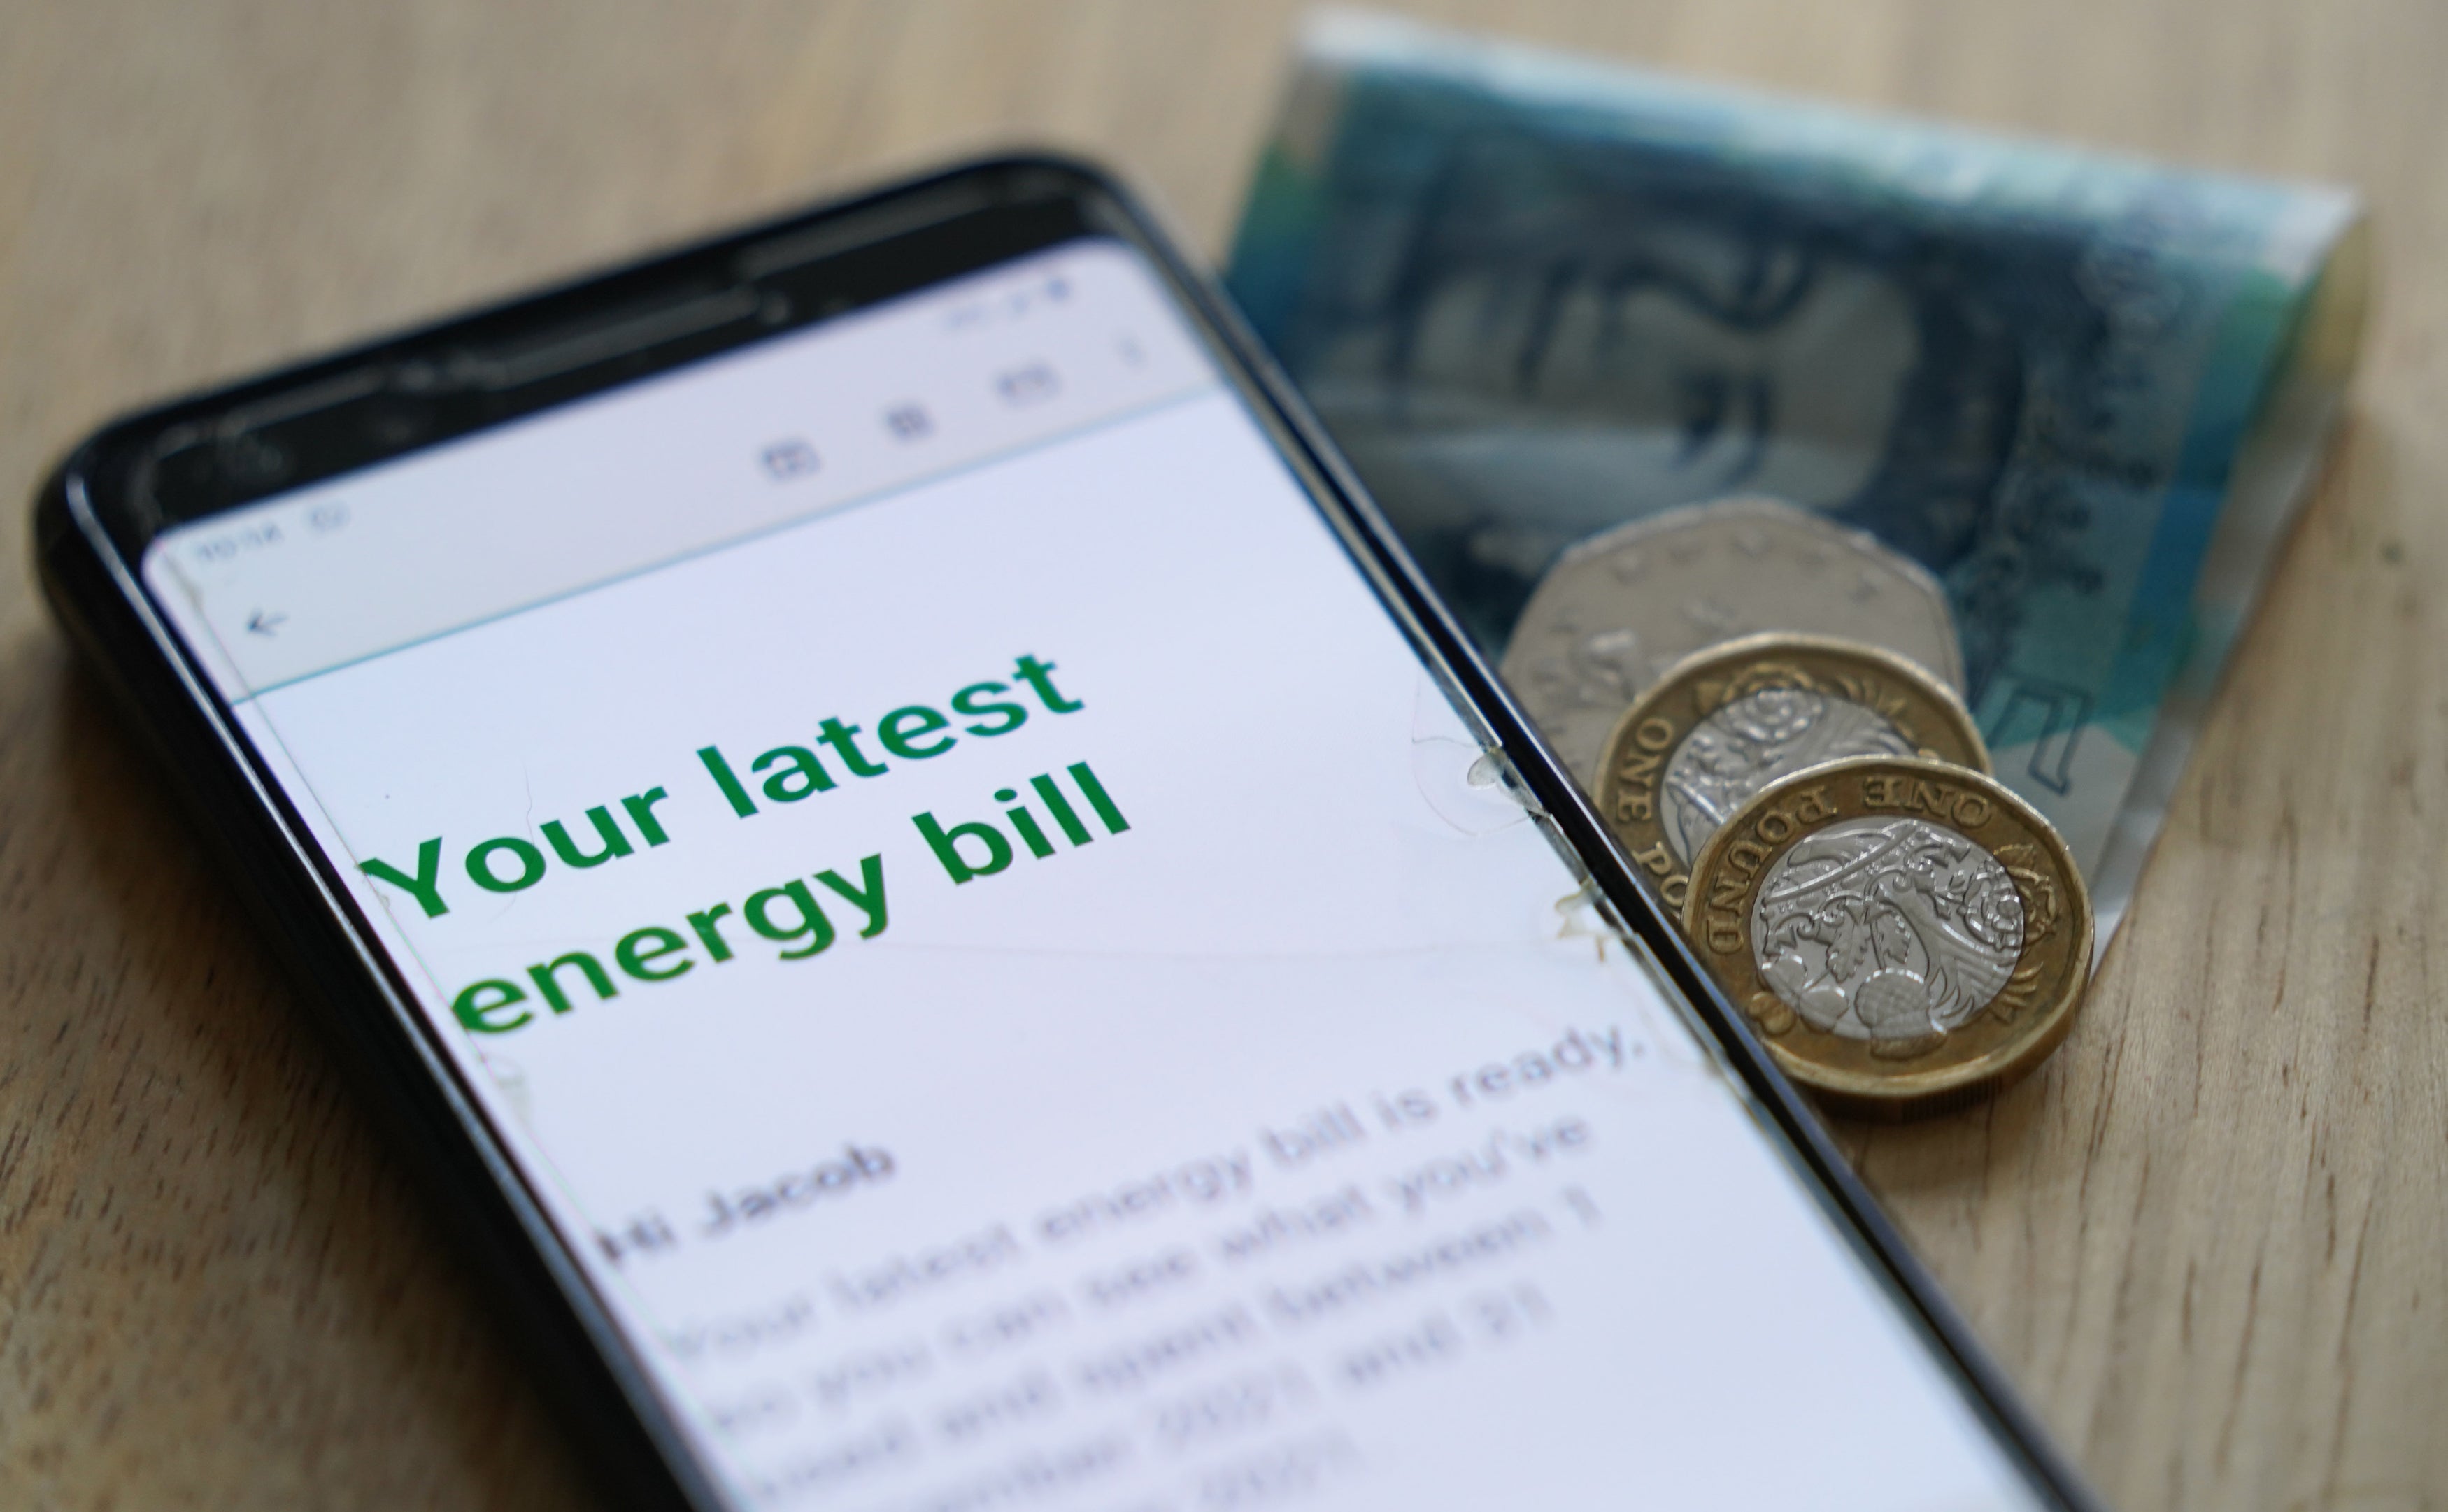 One-third of poor households struggle to manage energy bills and food costs, poll suggests